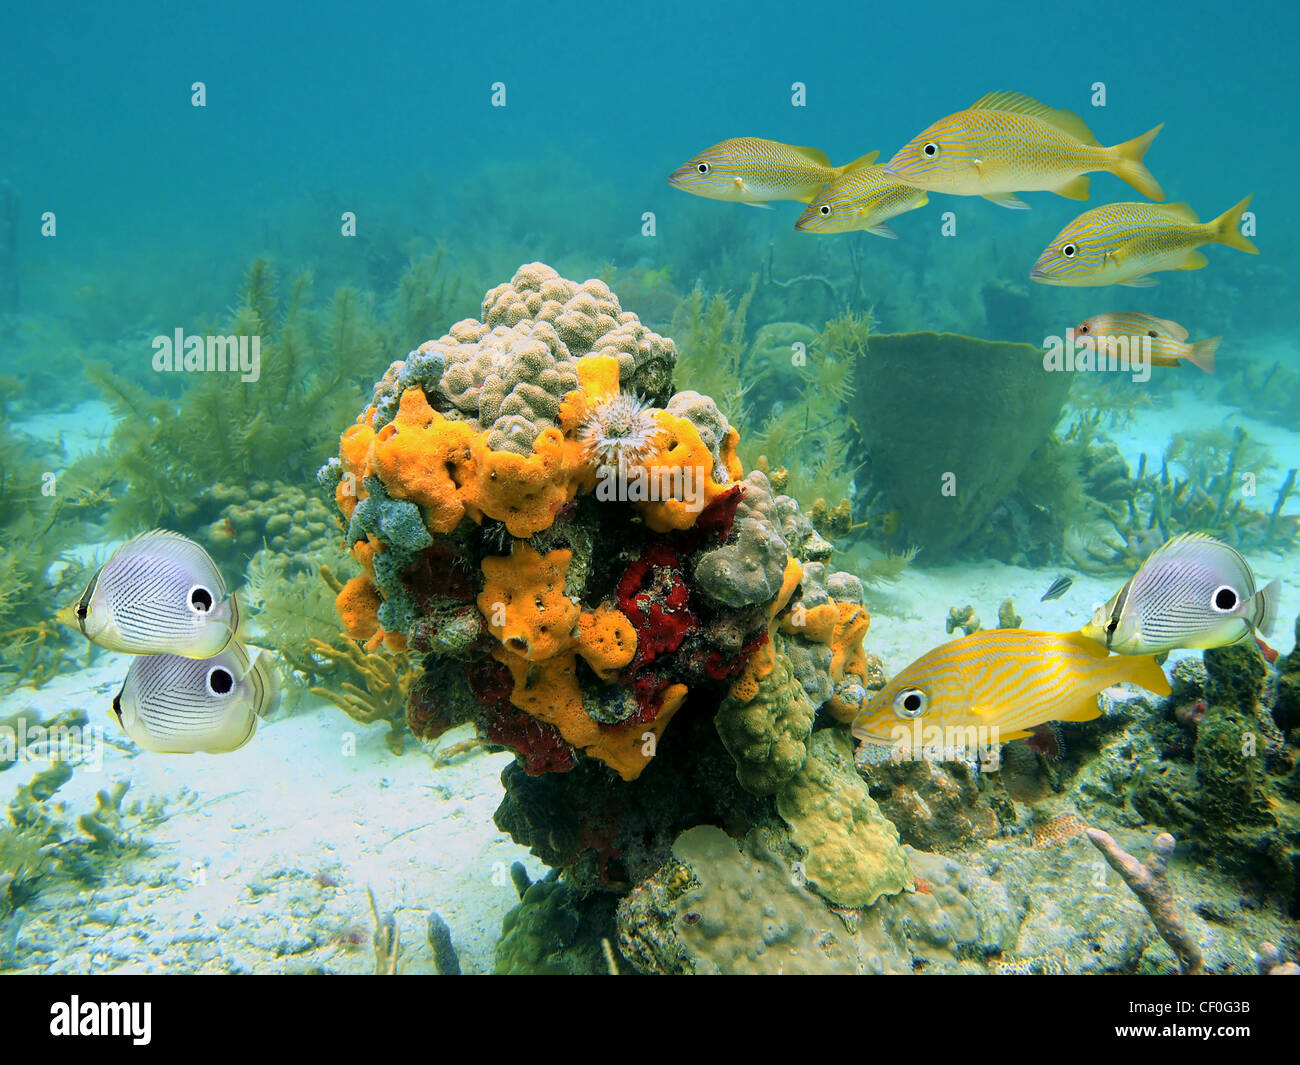 Underwater coral and sea sponges with tropical fish in a reef of the Caribbean sea Stock Photo